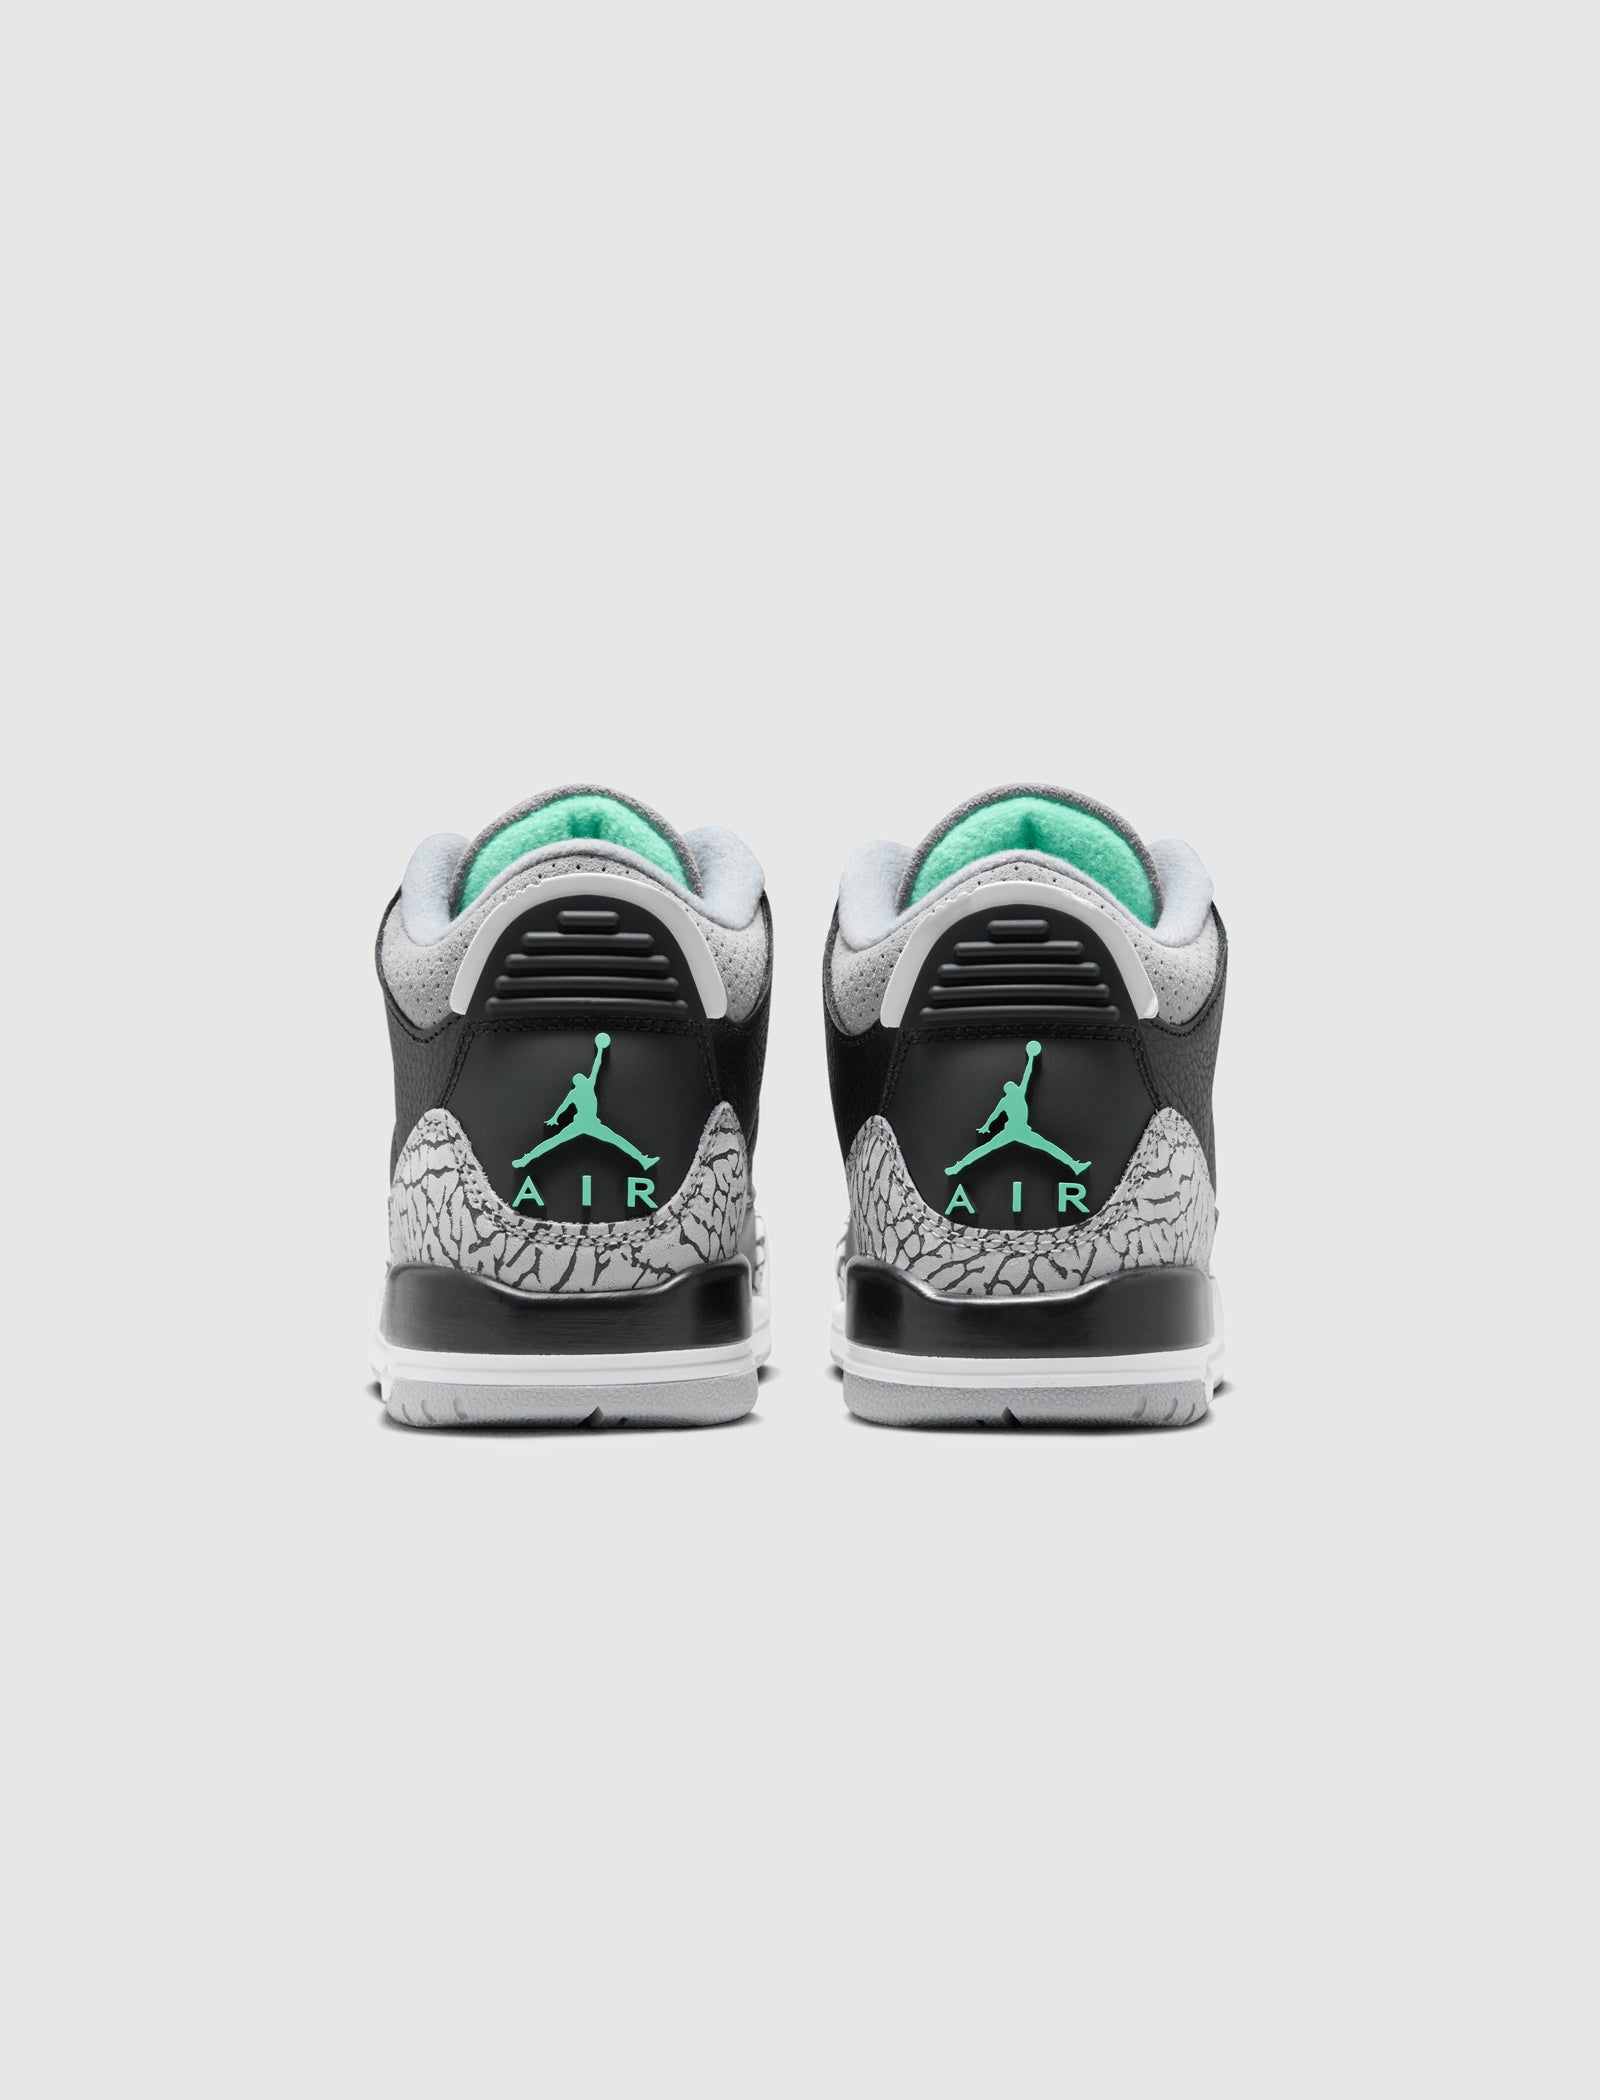 BAIT on X: The Air Jordan 3 GS “Red Stardust” is available now at